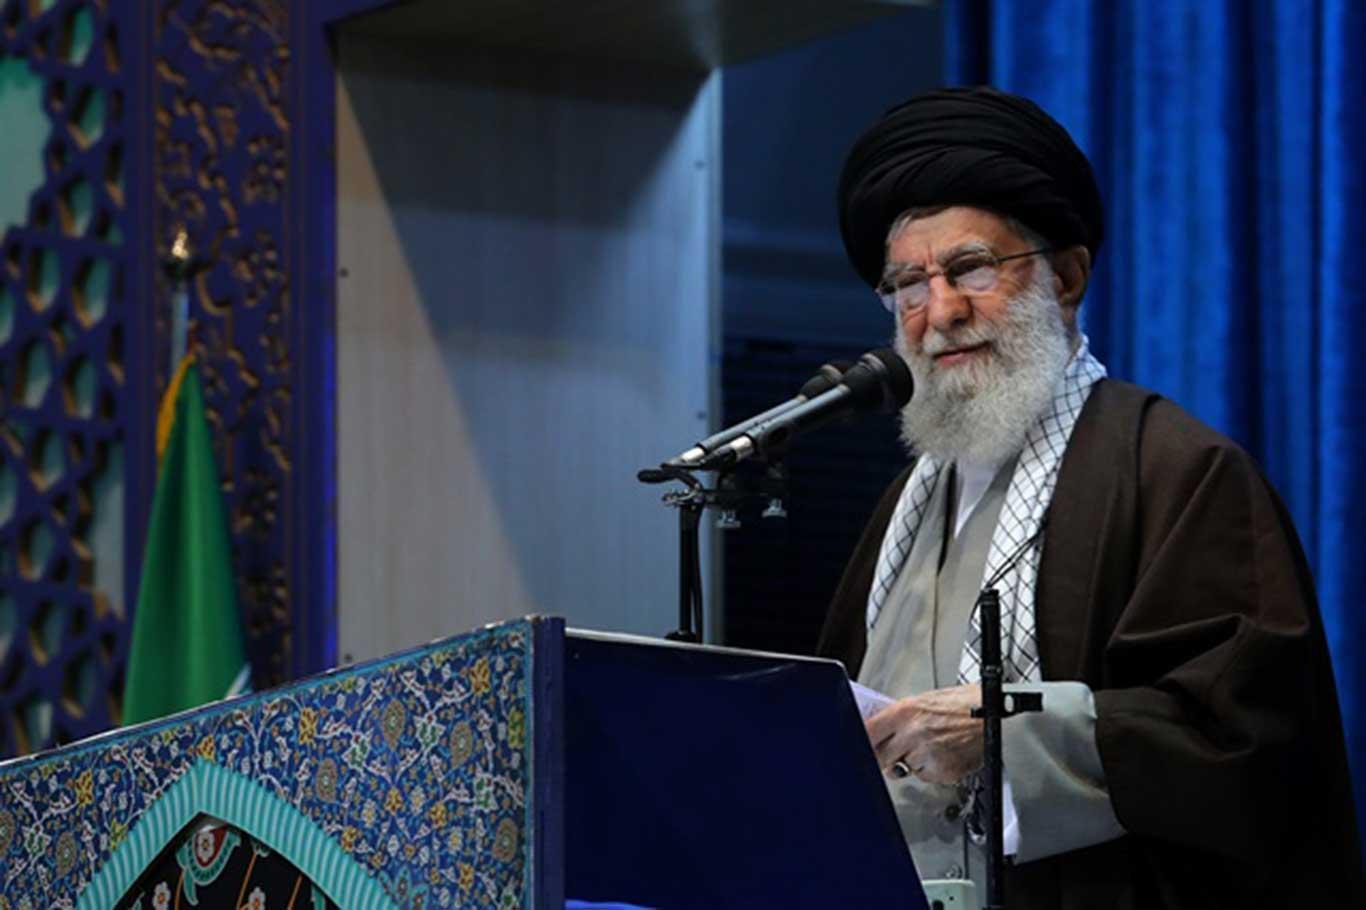 Khamenei: Iran's response was a major blow to America's fearsome superpower image